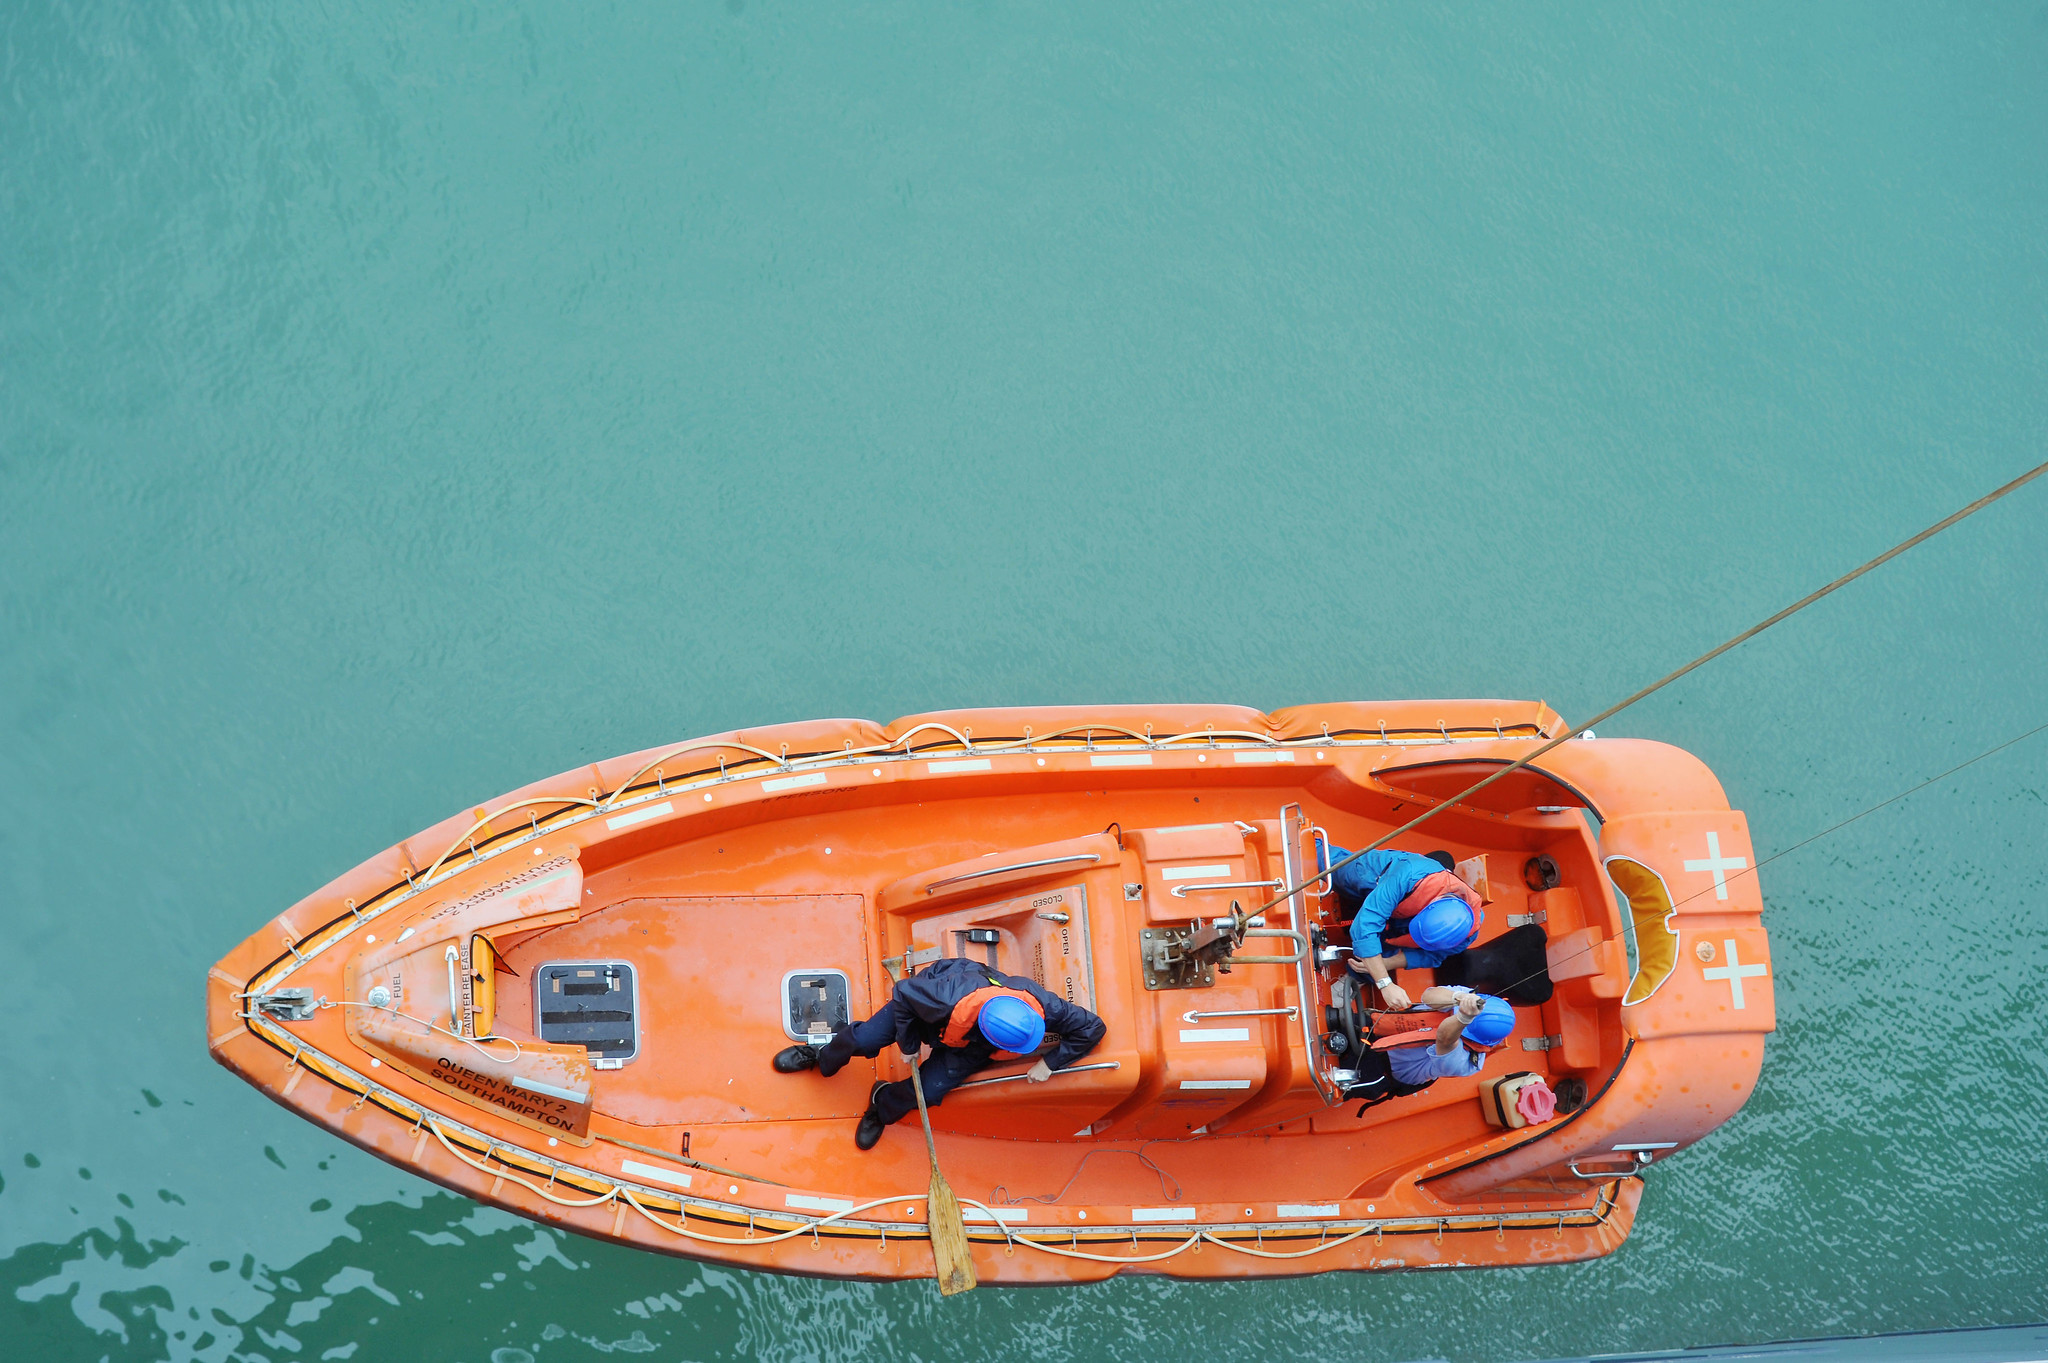 Arial view of an organe lifeboat with 3 people being hauled above the sea